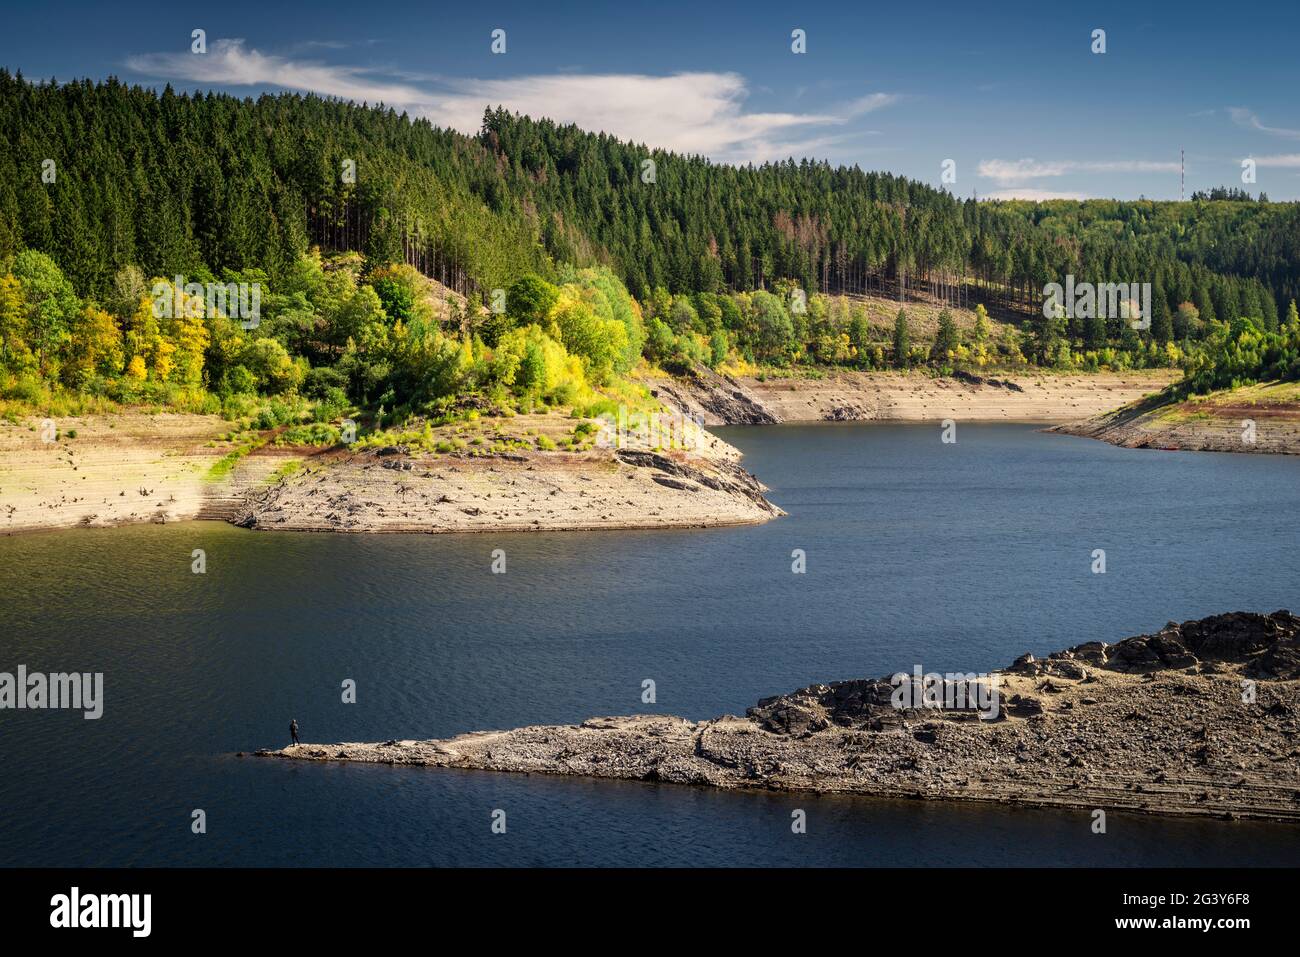 Schulenberg High Resolution Stock Photography and Images - Alamy